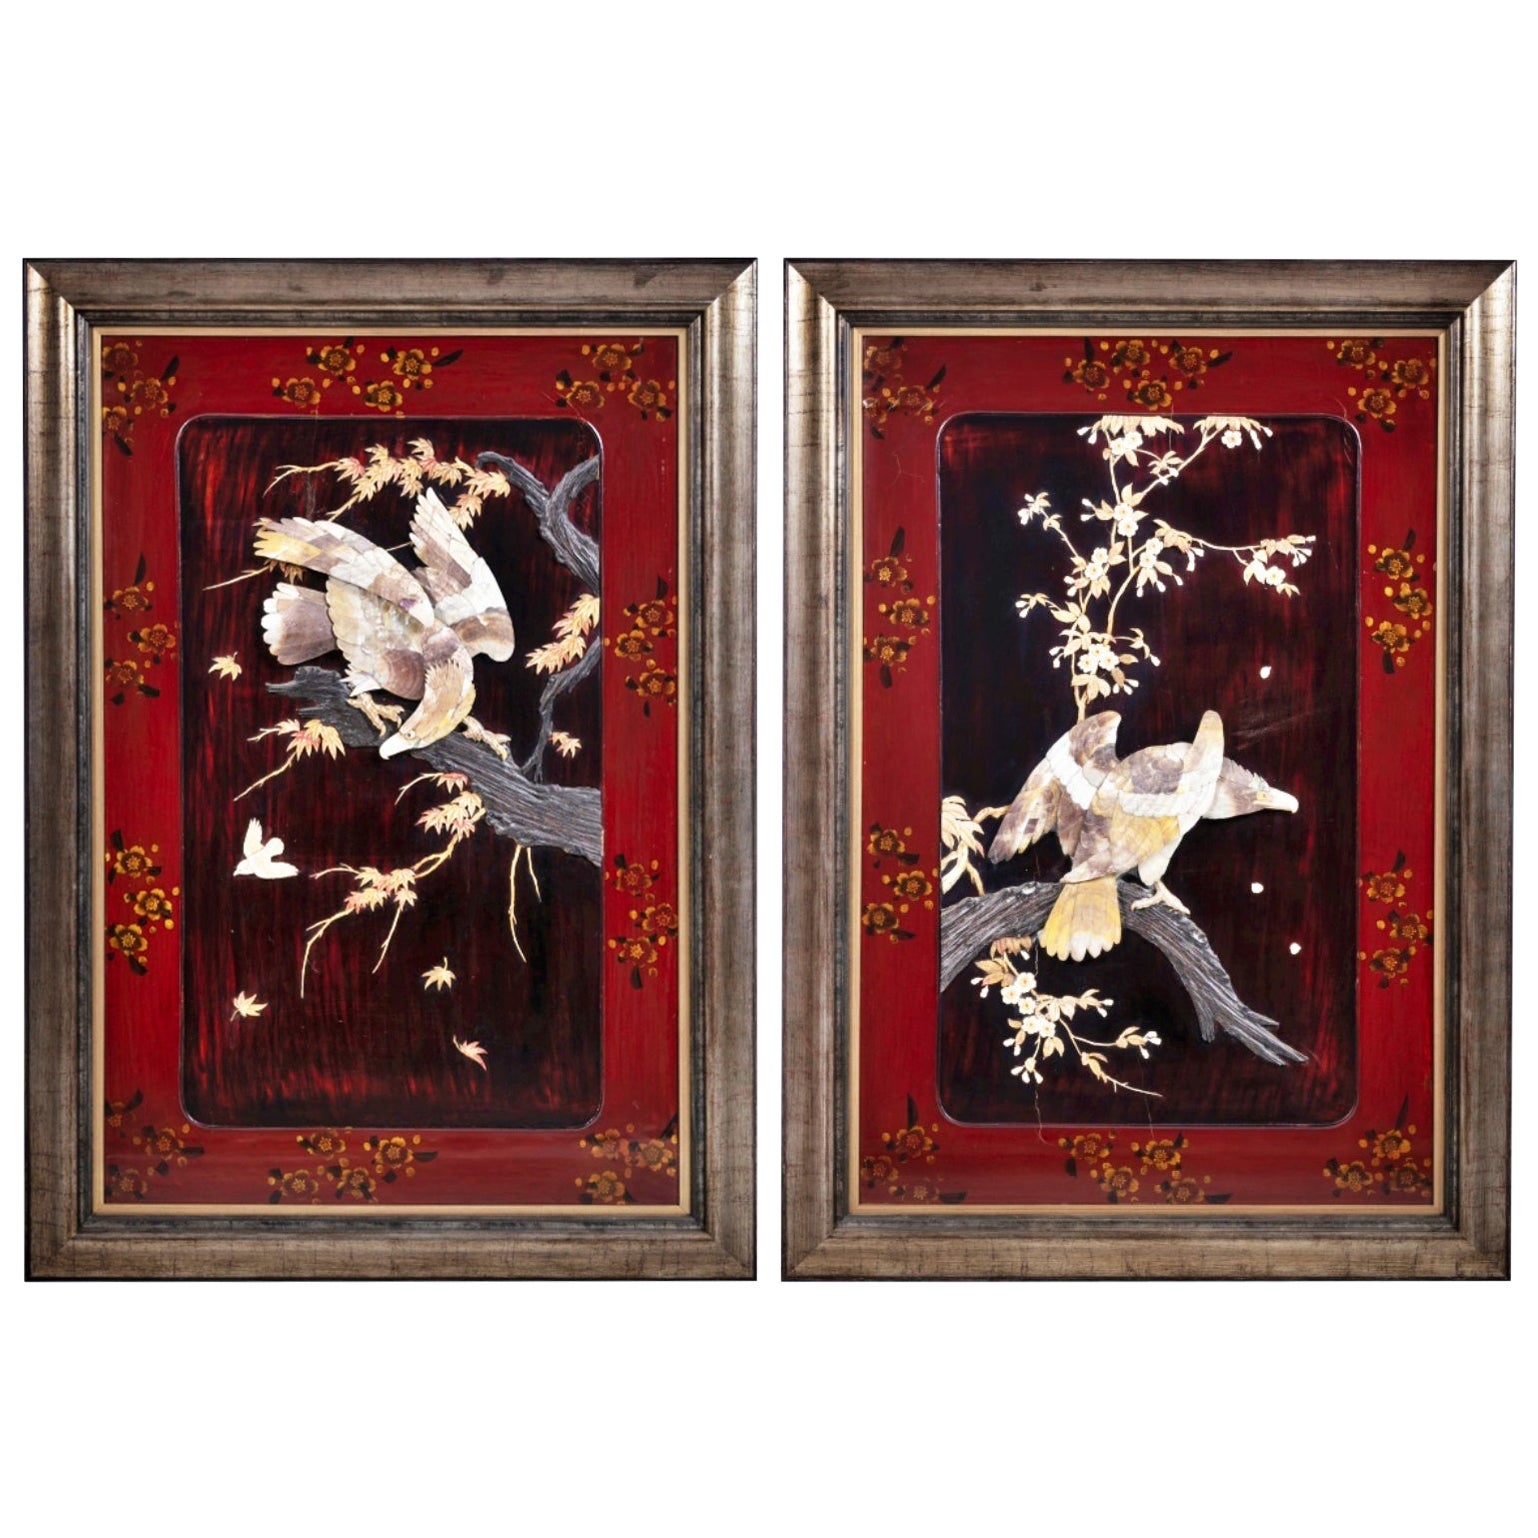 Important Pair of Panels Japan, Meiji Period '1868-1912' For Sale